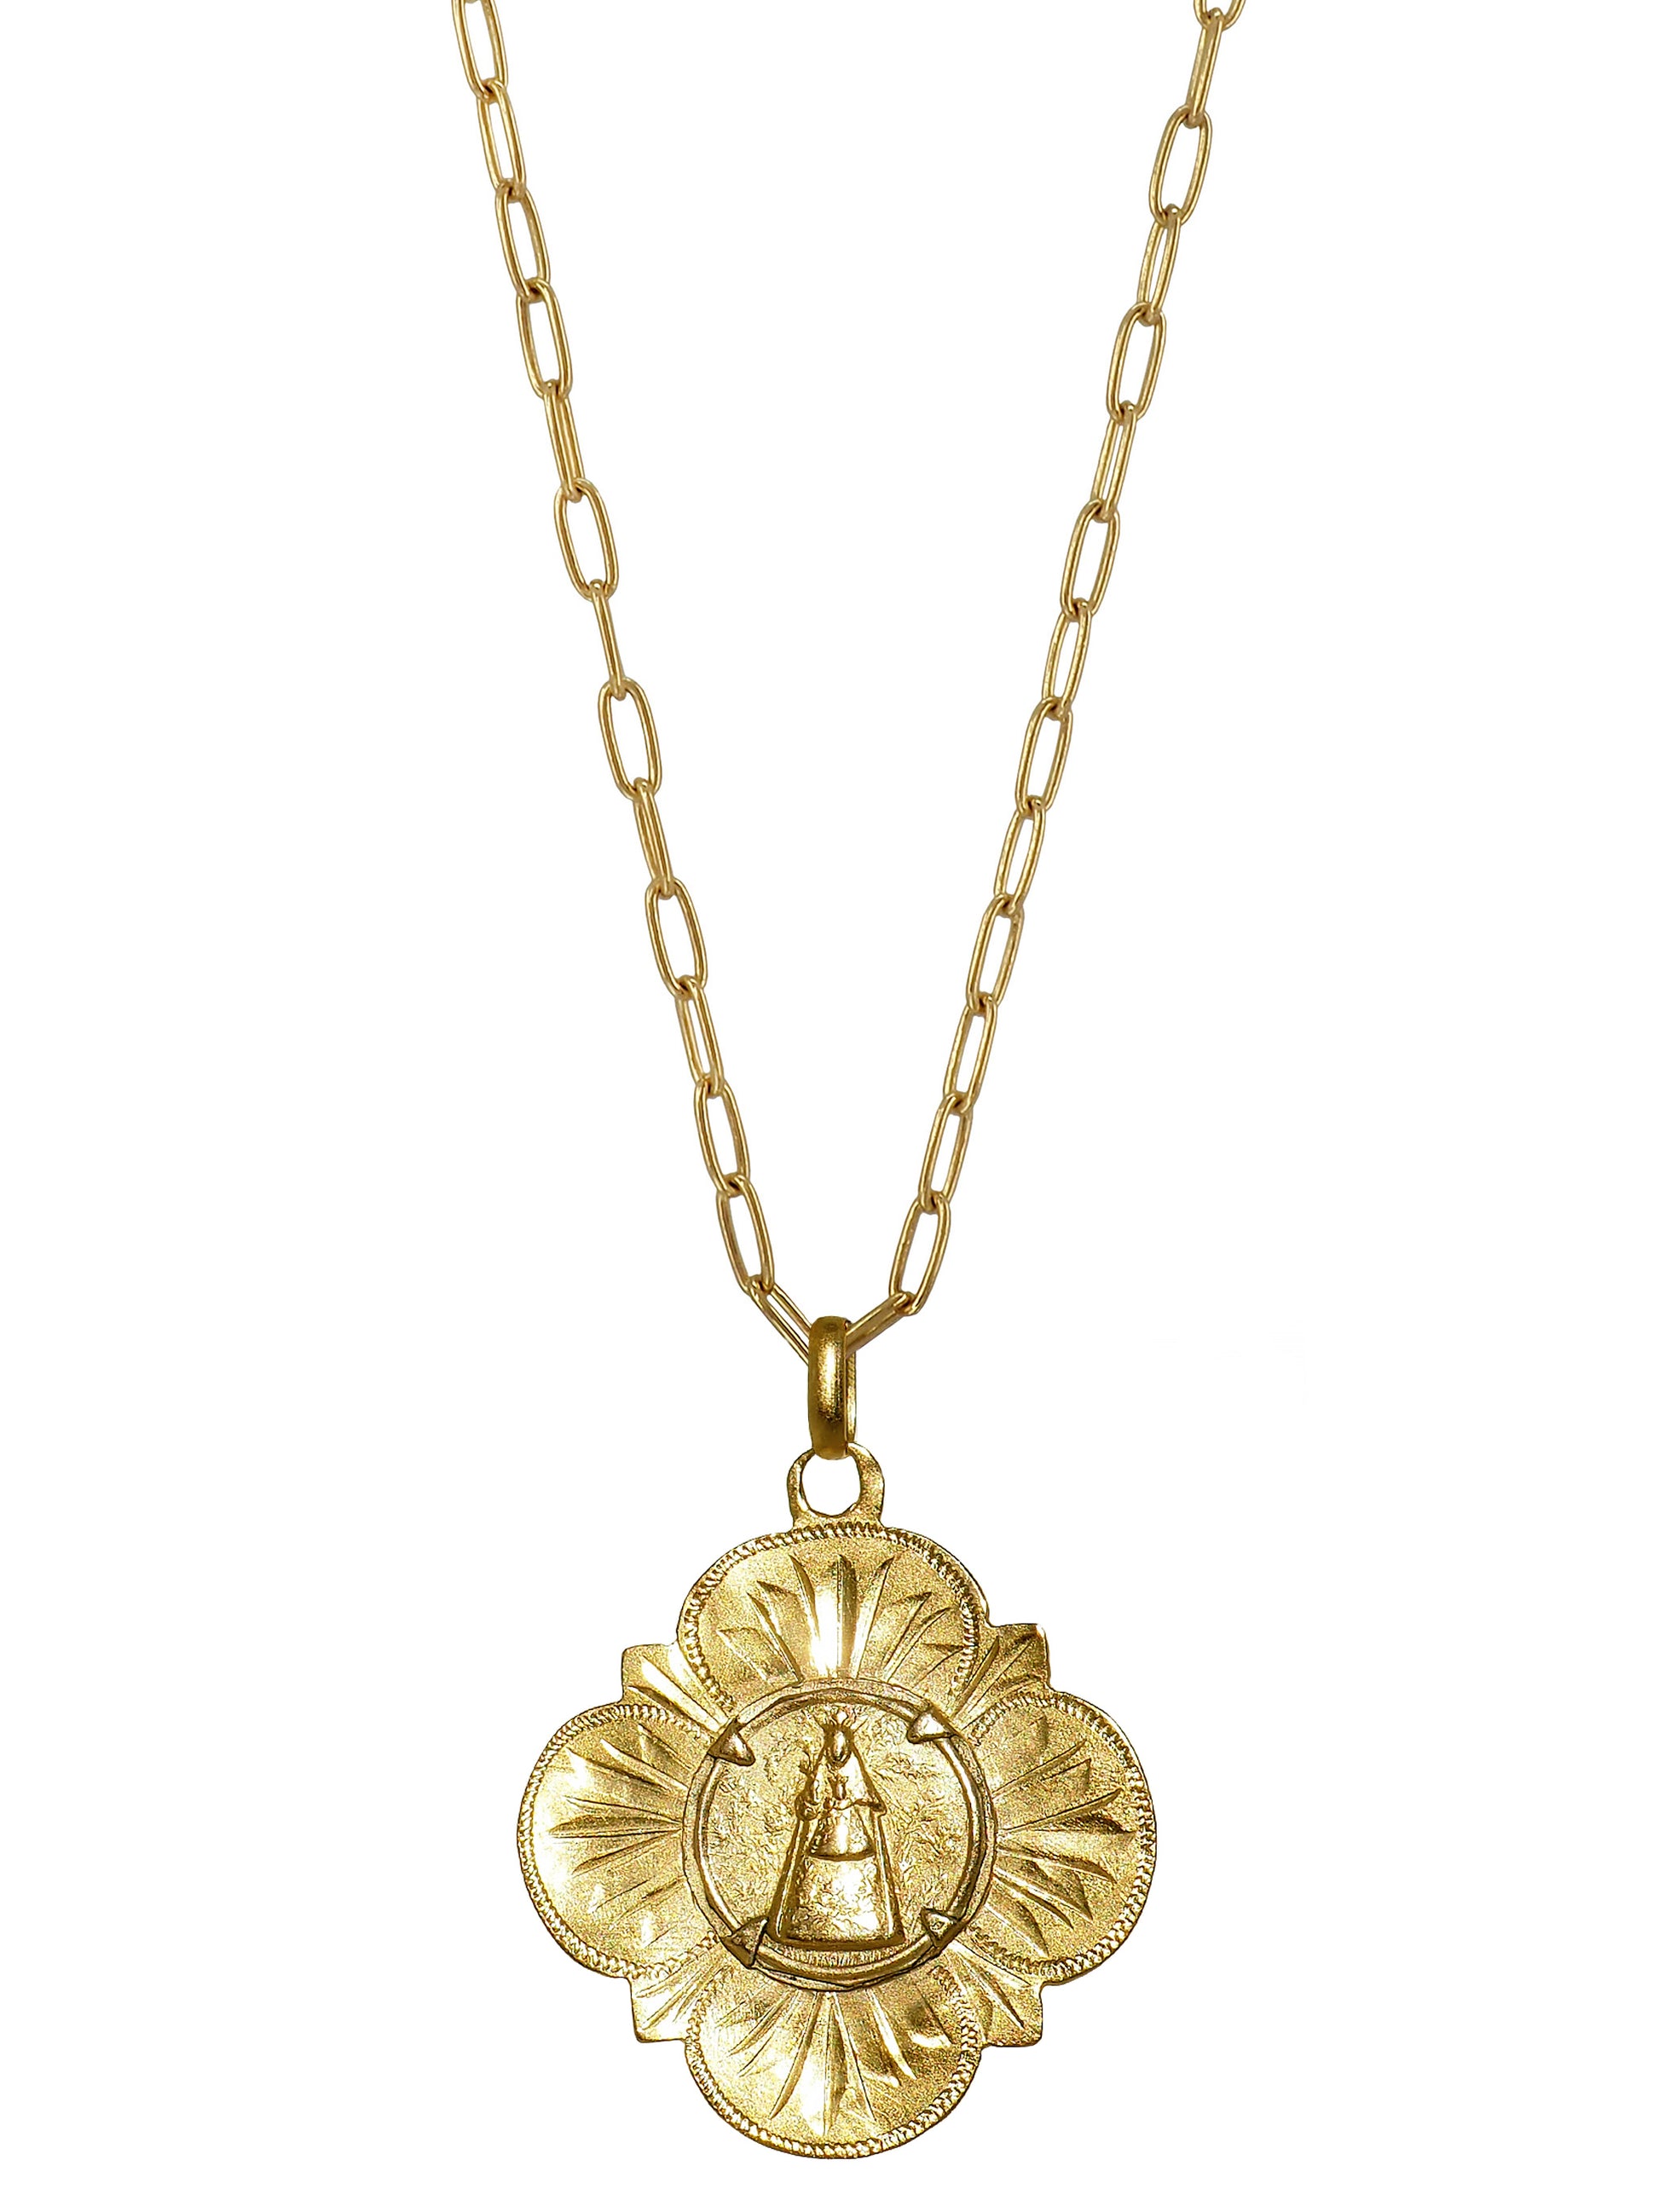 Holy Madonna Necklace, Gold plated Sterling Silver, Gender Neutral